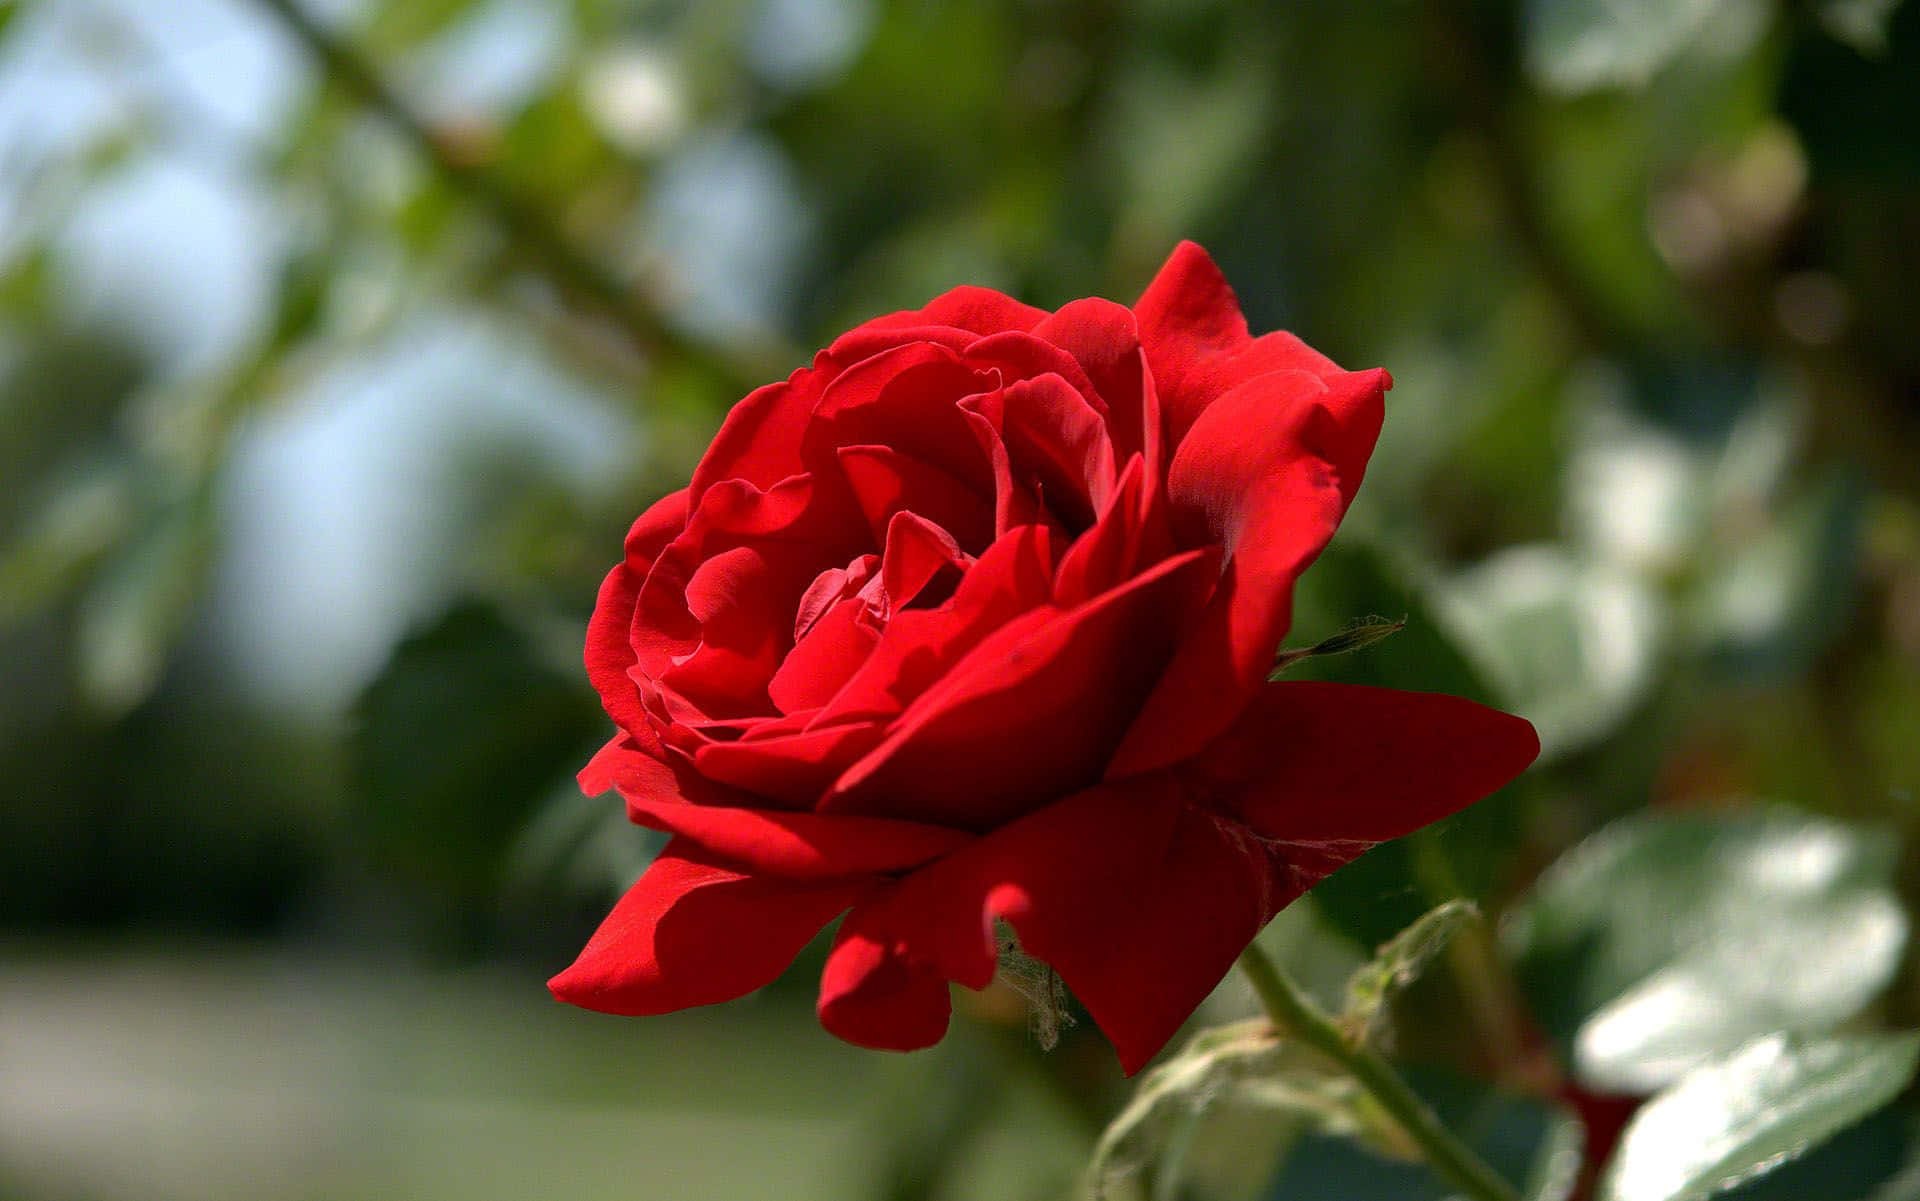 Show your love with a beautiful red rose.